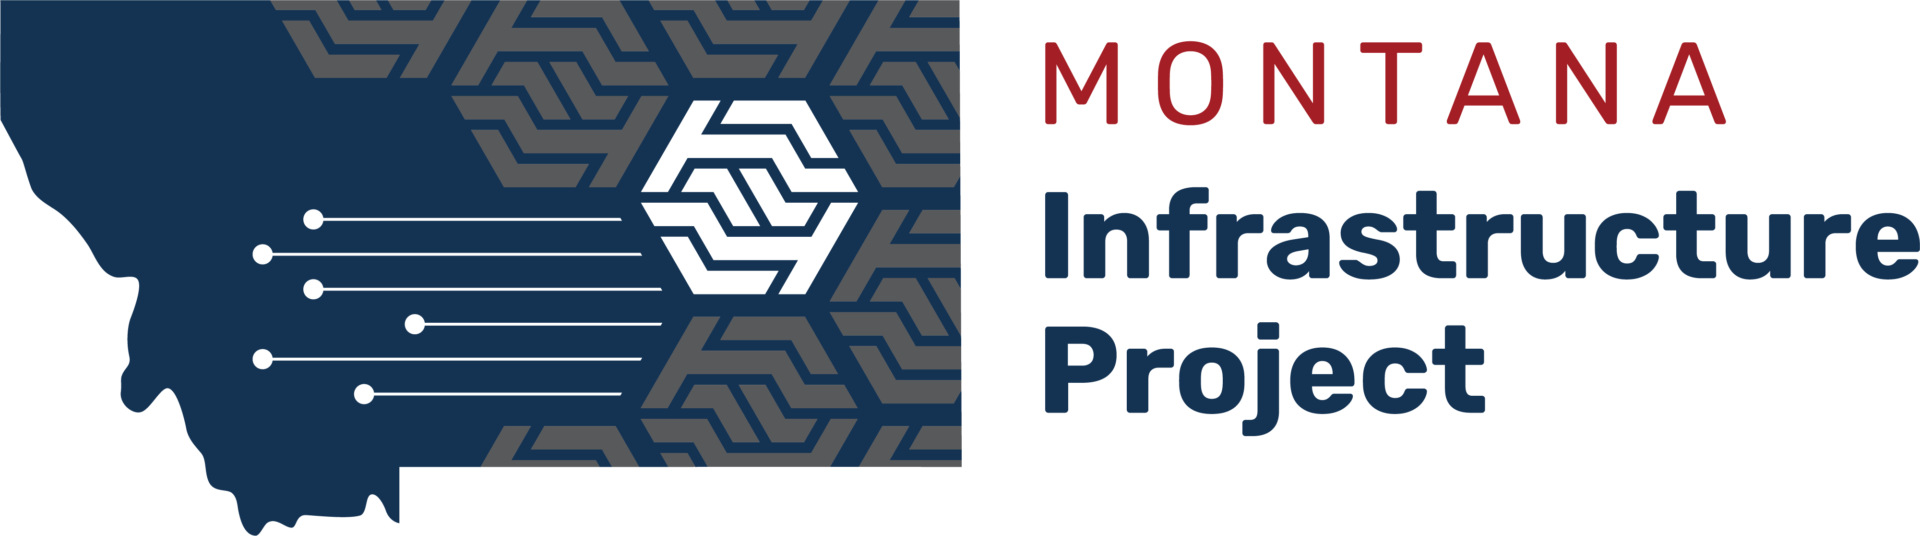 Montana Infrastructure Project logo